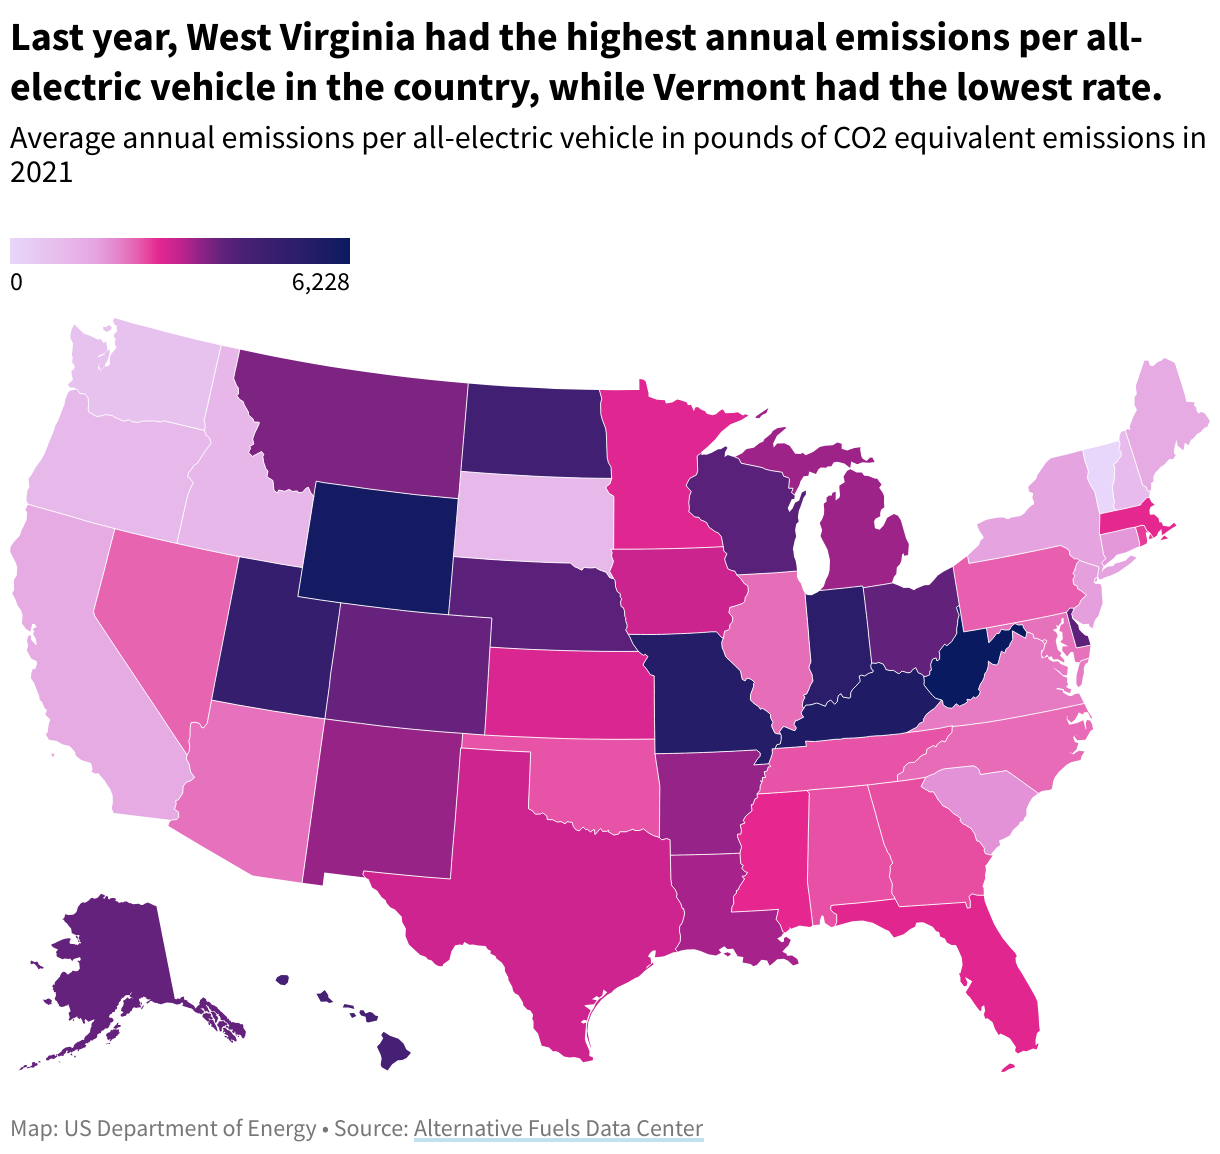 A state map showing average annual emissions per all-electric vehicle in pounds of CO2 equivalent emissions.